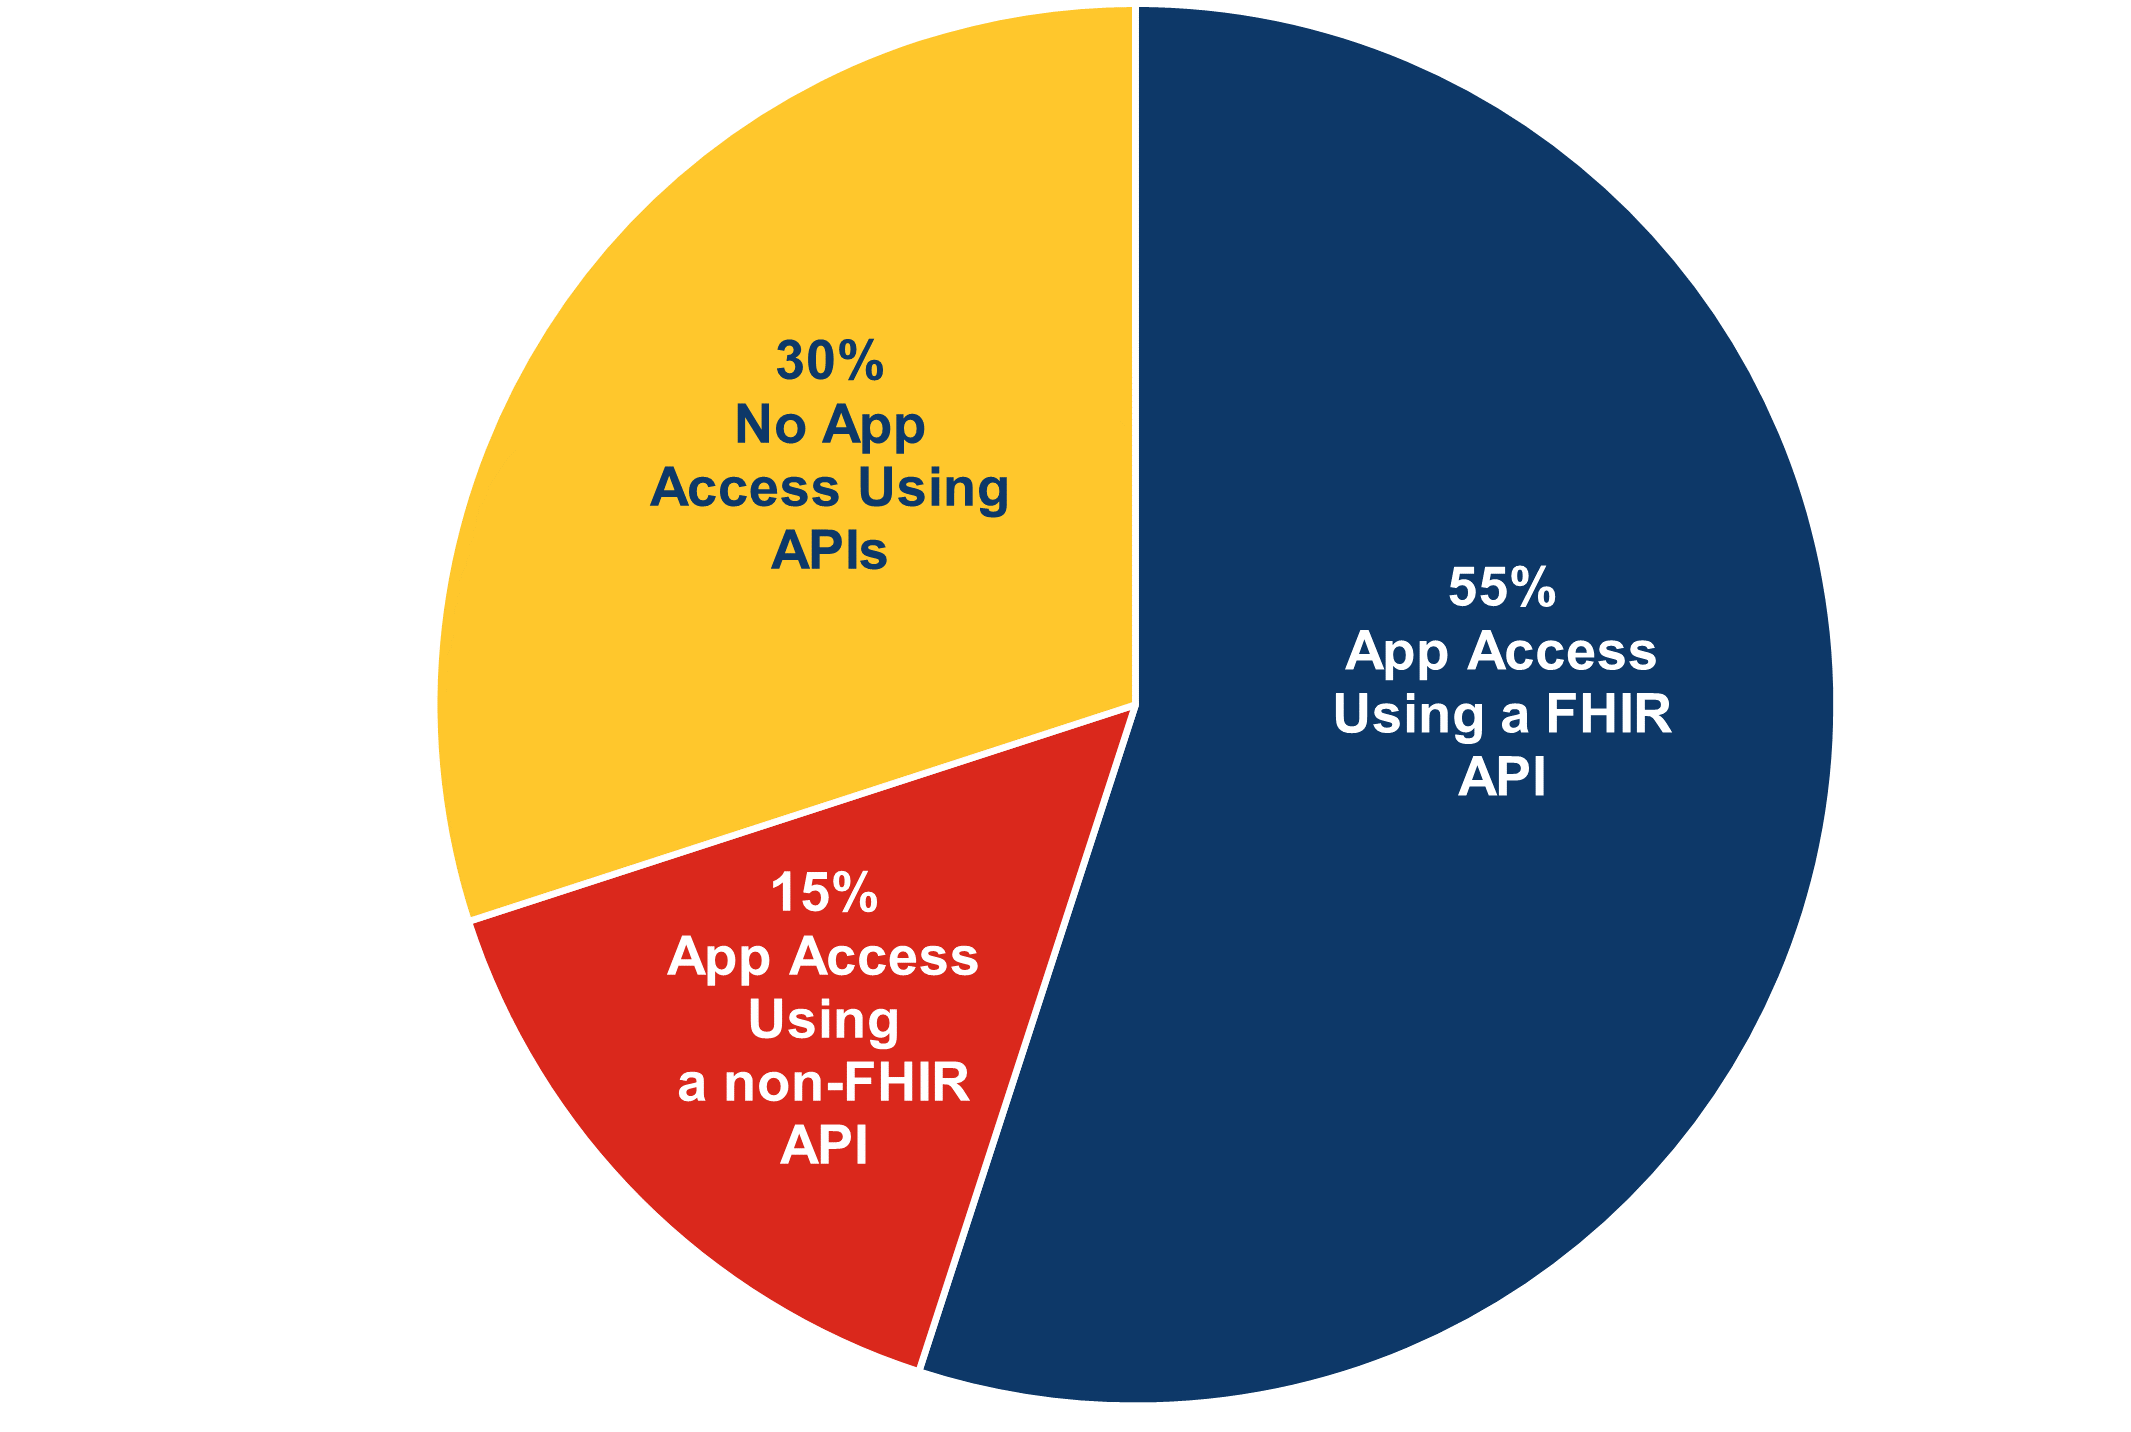 The figure is a pie chart and shows three distinct segments. 55 percent of hospitals provided patient access to their health information through apps using a fast healthcare interoperability resource standardized application programming interface. 15 percent of hospitals provided patient access to their health information through apps not using the fast healthcare interoperability resource standard. 30 percent of hospitals did not provide patient access to their health information through an app.